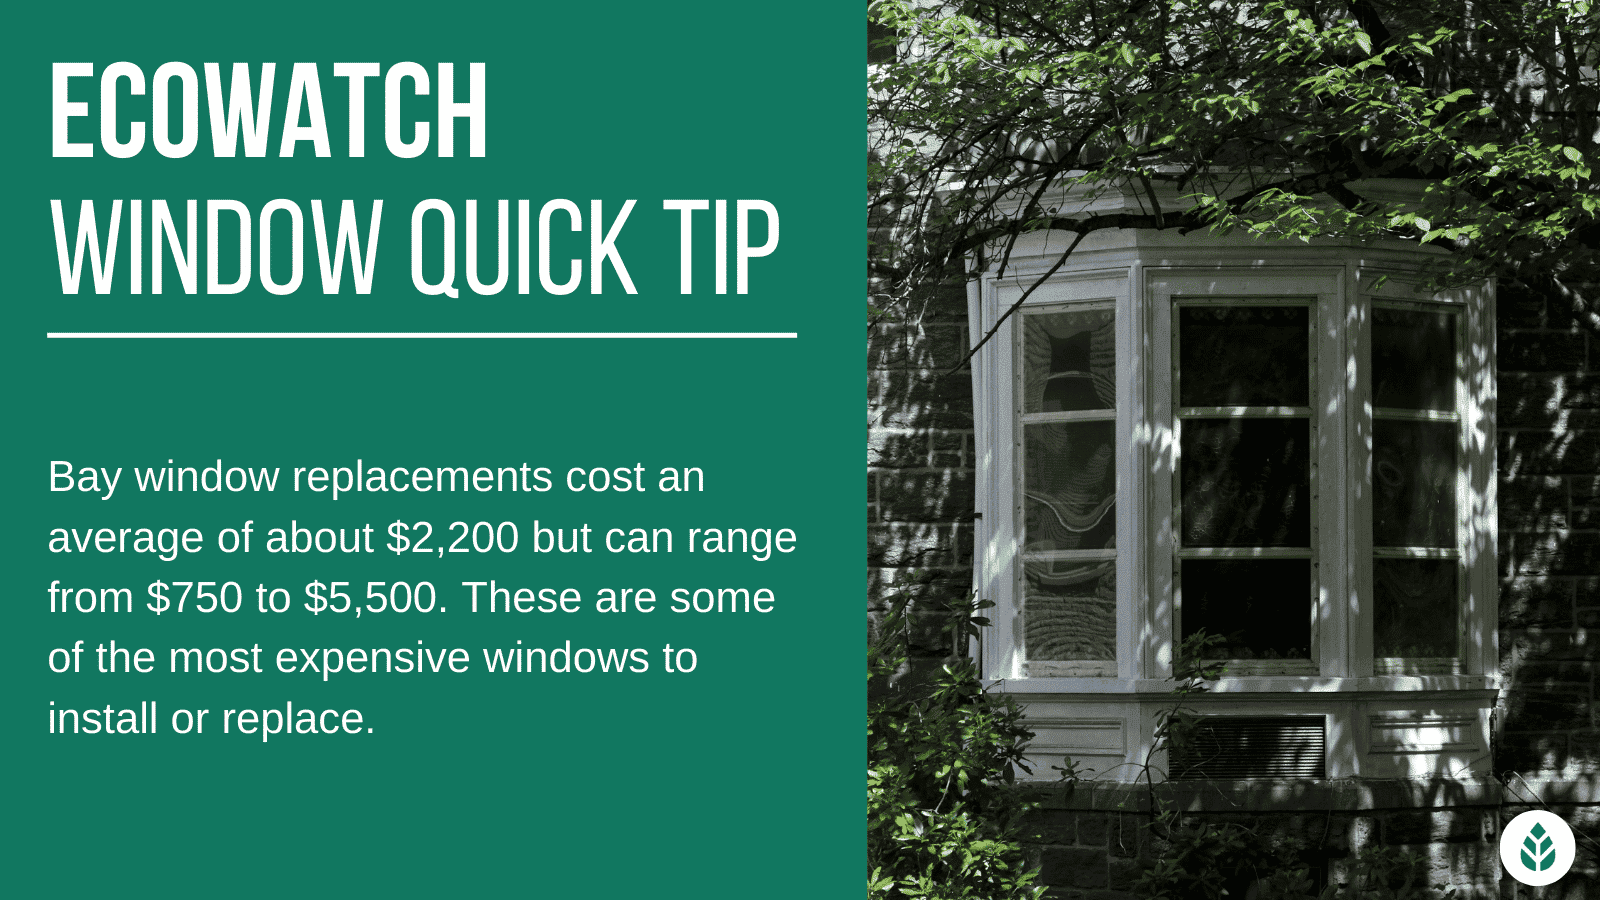 bay window replacement cost quick tip